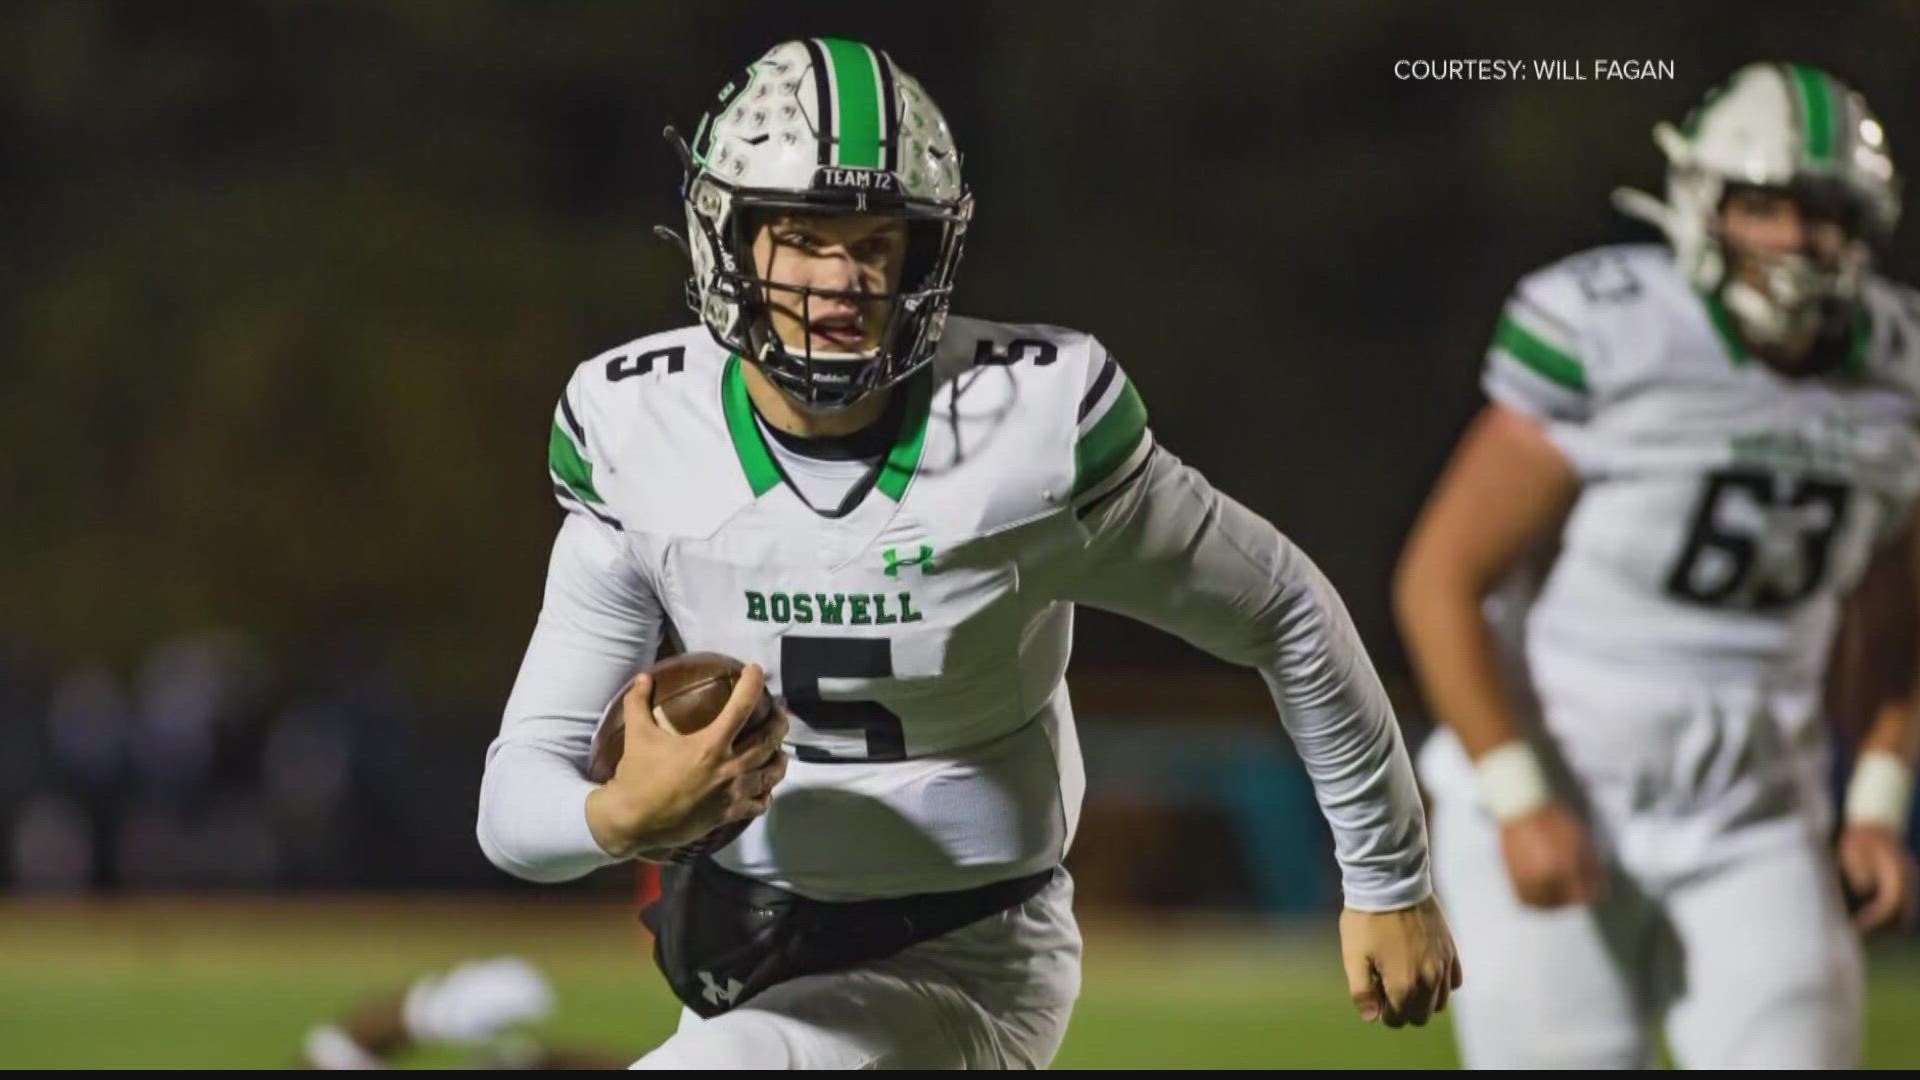 The beloved Roswell High quarterback had dreams of playing college football receiving scholarship offers from several programs.